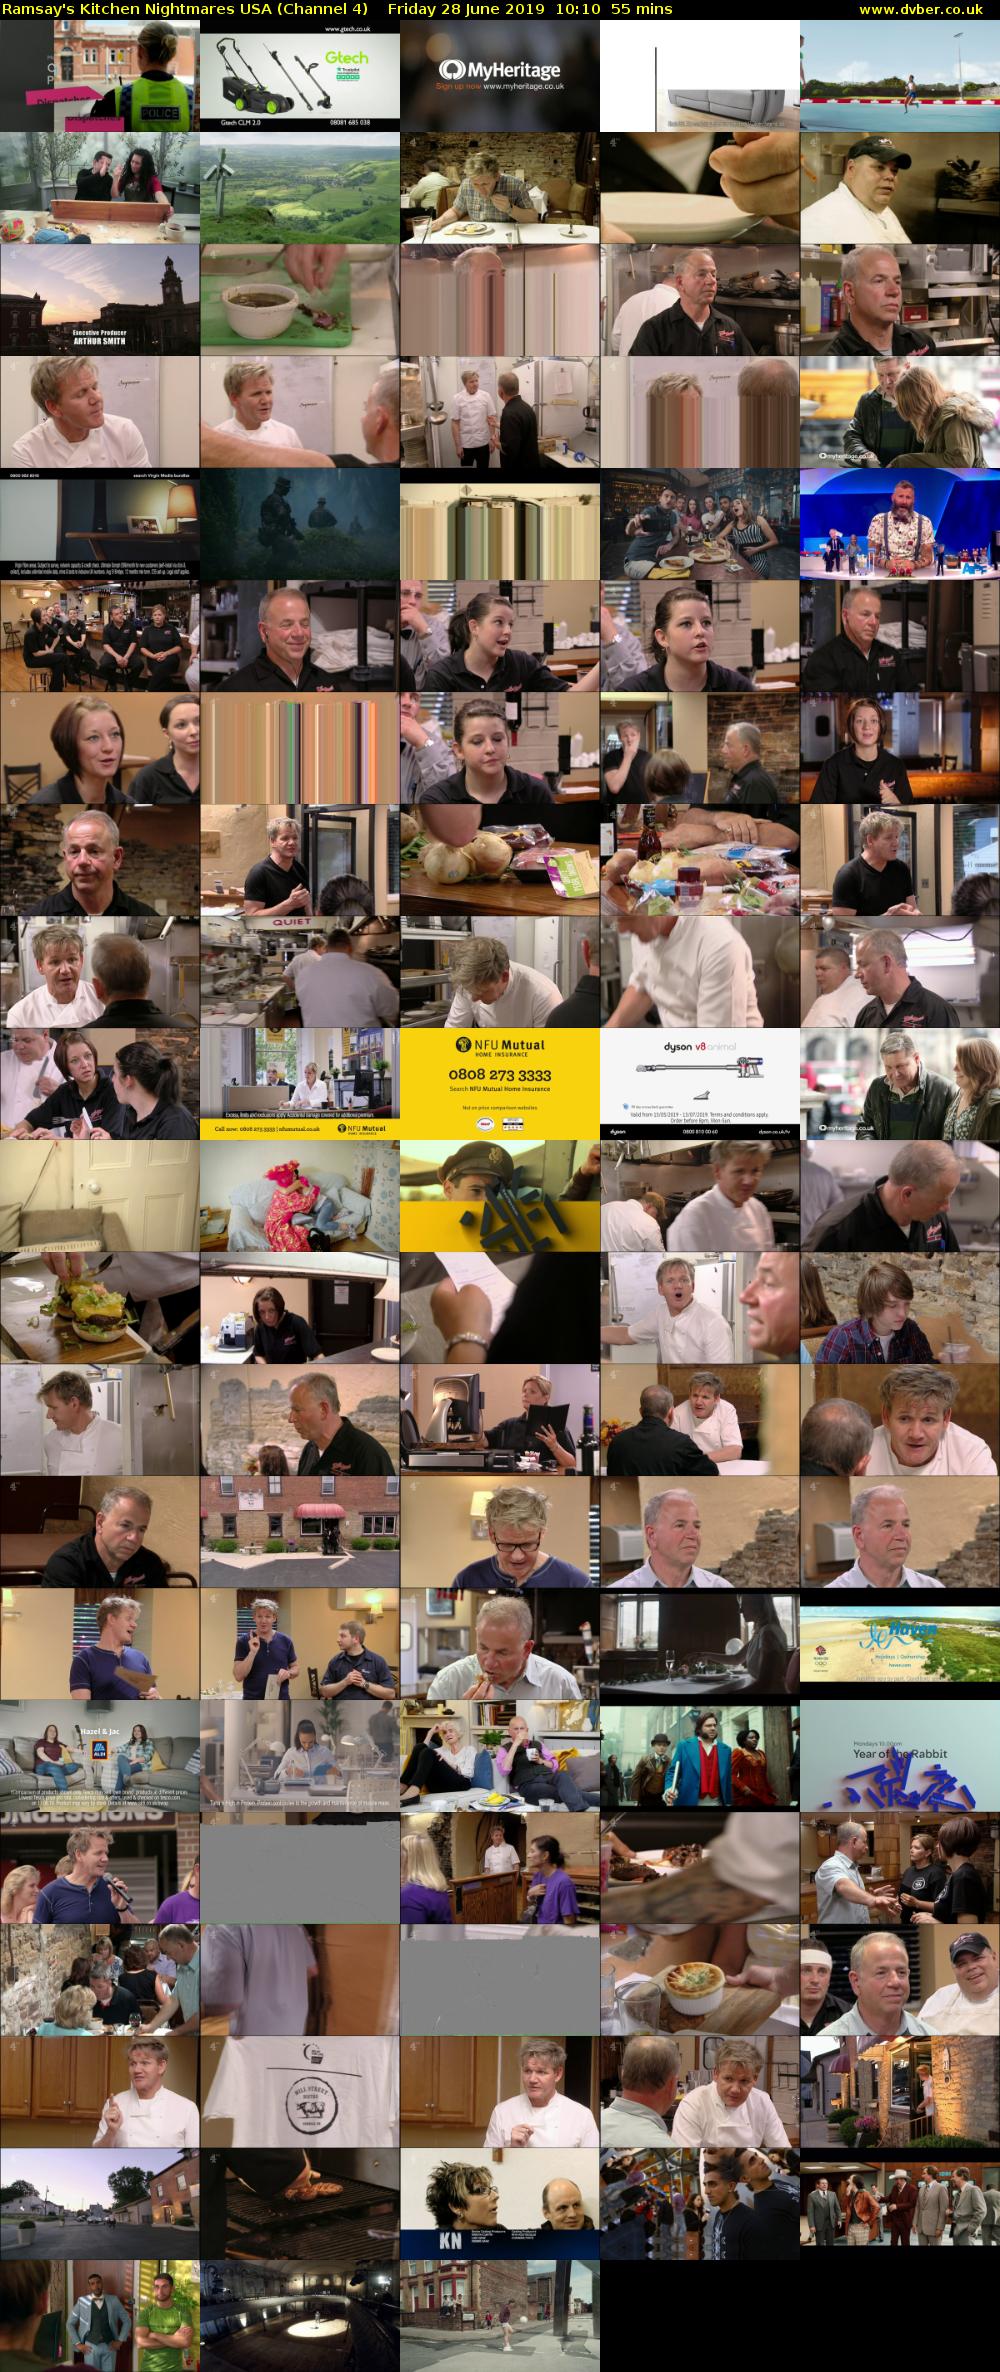 Ramsay's Kitchen Nightmares USA (Channel 4) Friday 28 June 2019 10:10 - 11:05